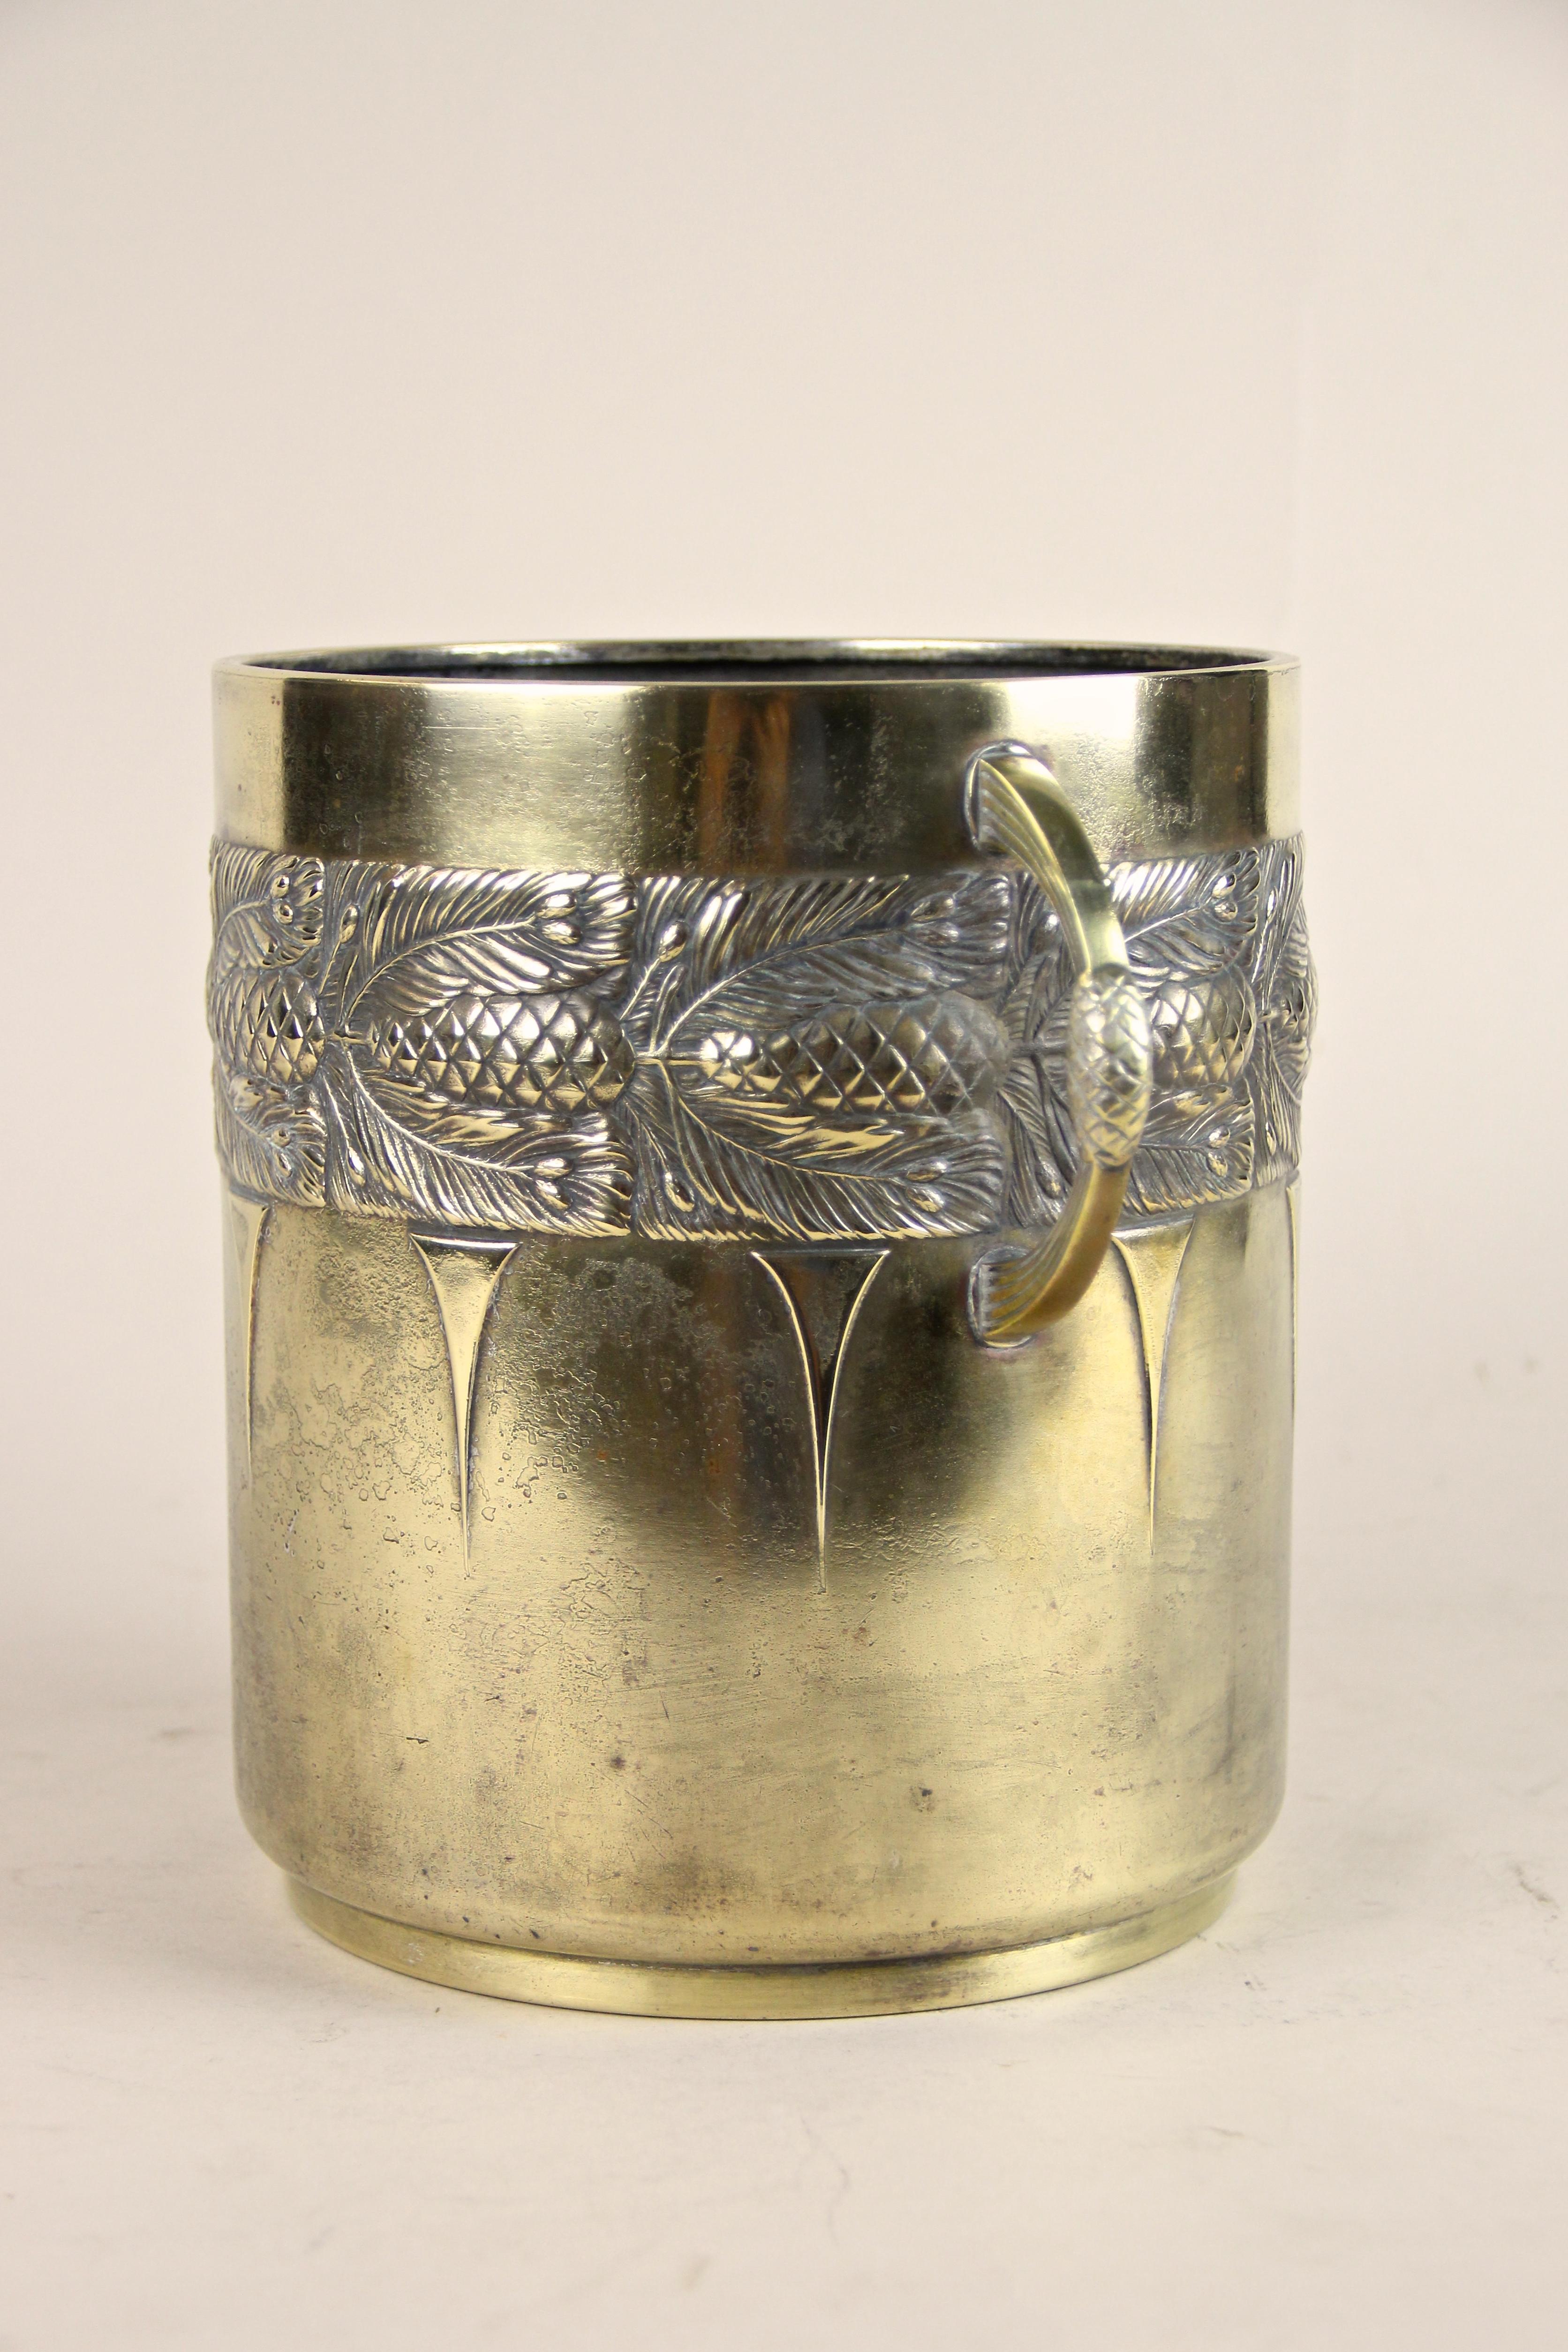 20th Century Brass Wine Cooler or Cachepot by WMF Art Nouveau, Germany, circa 1915